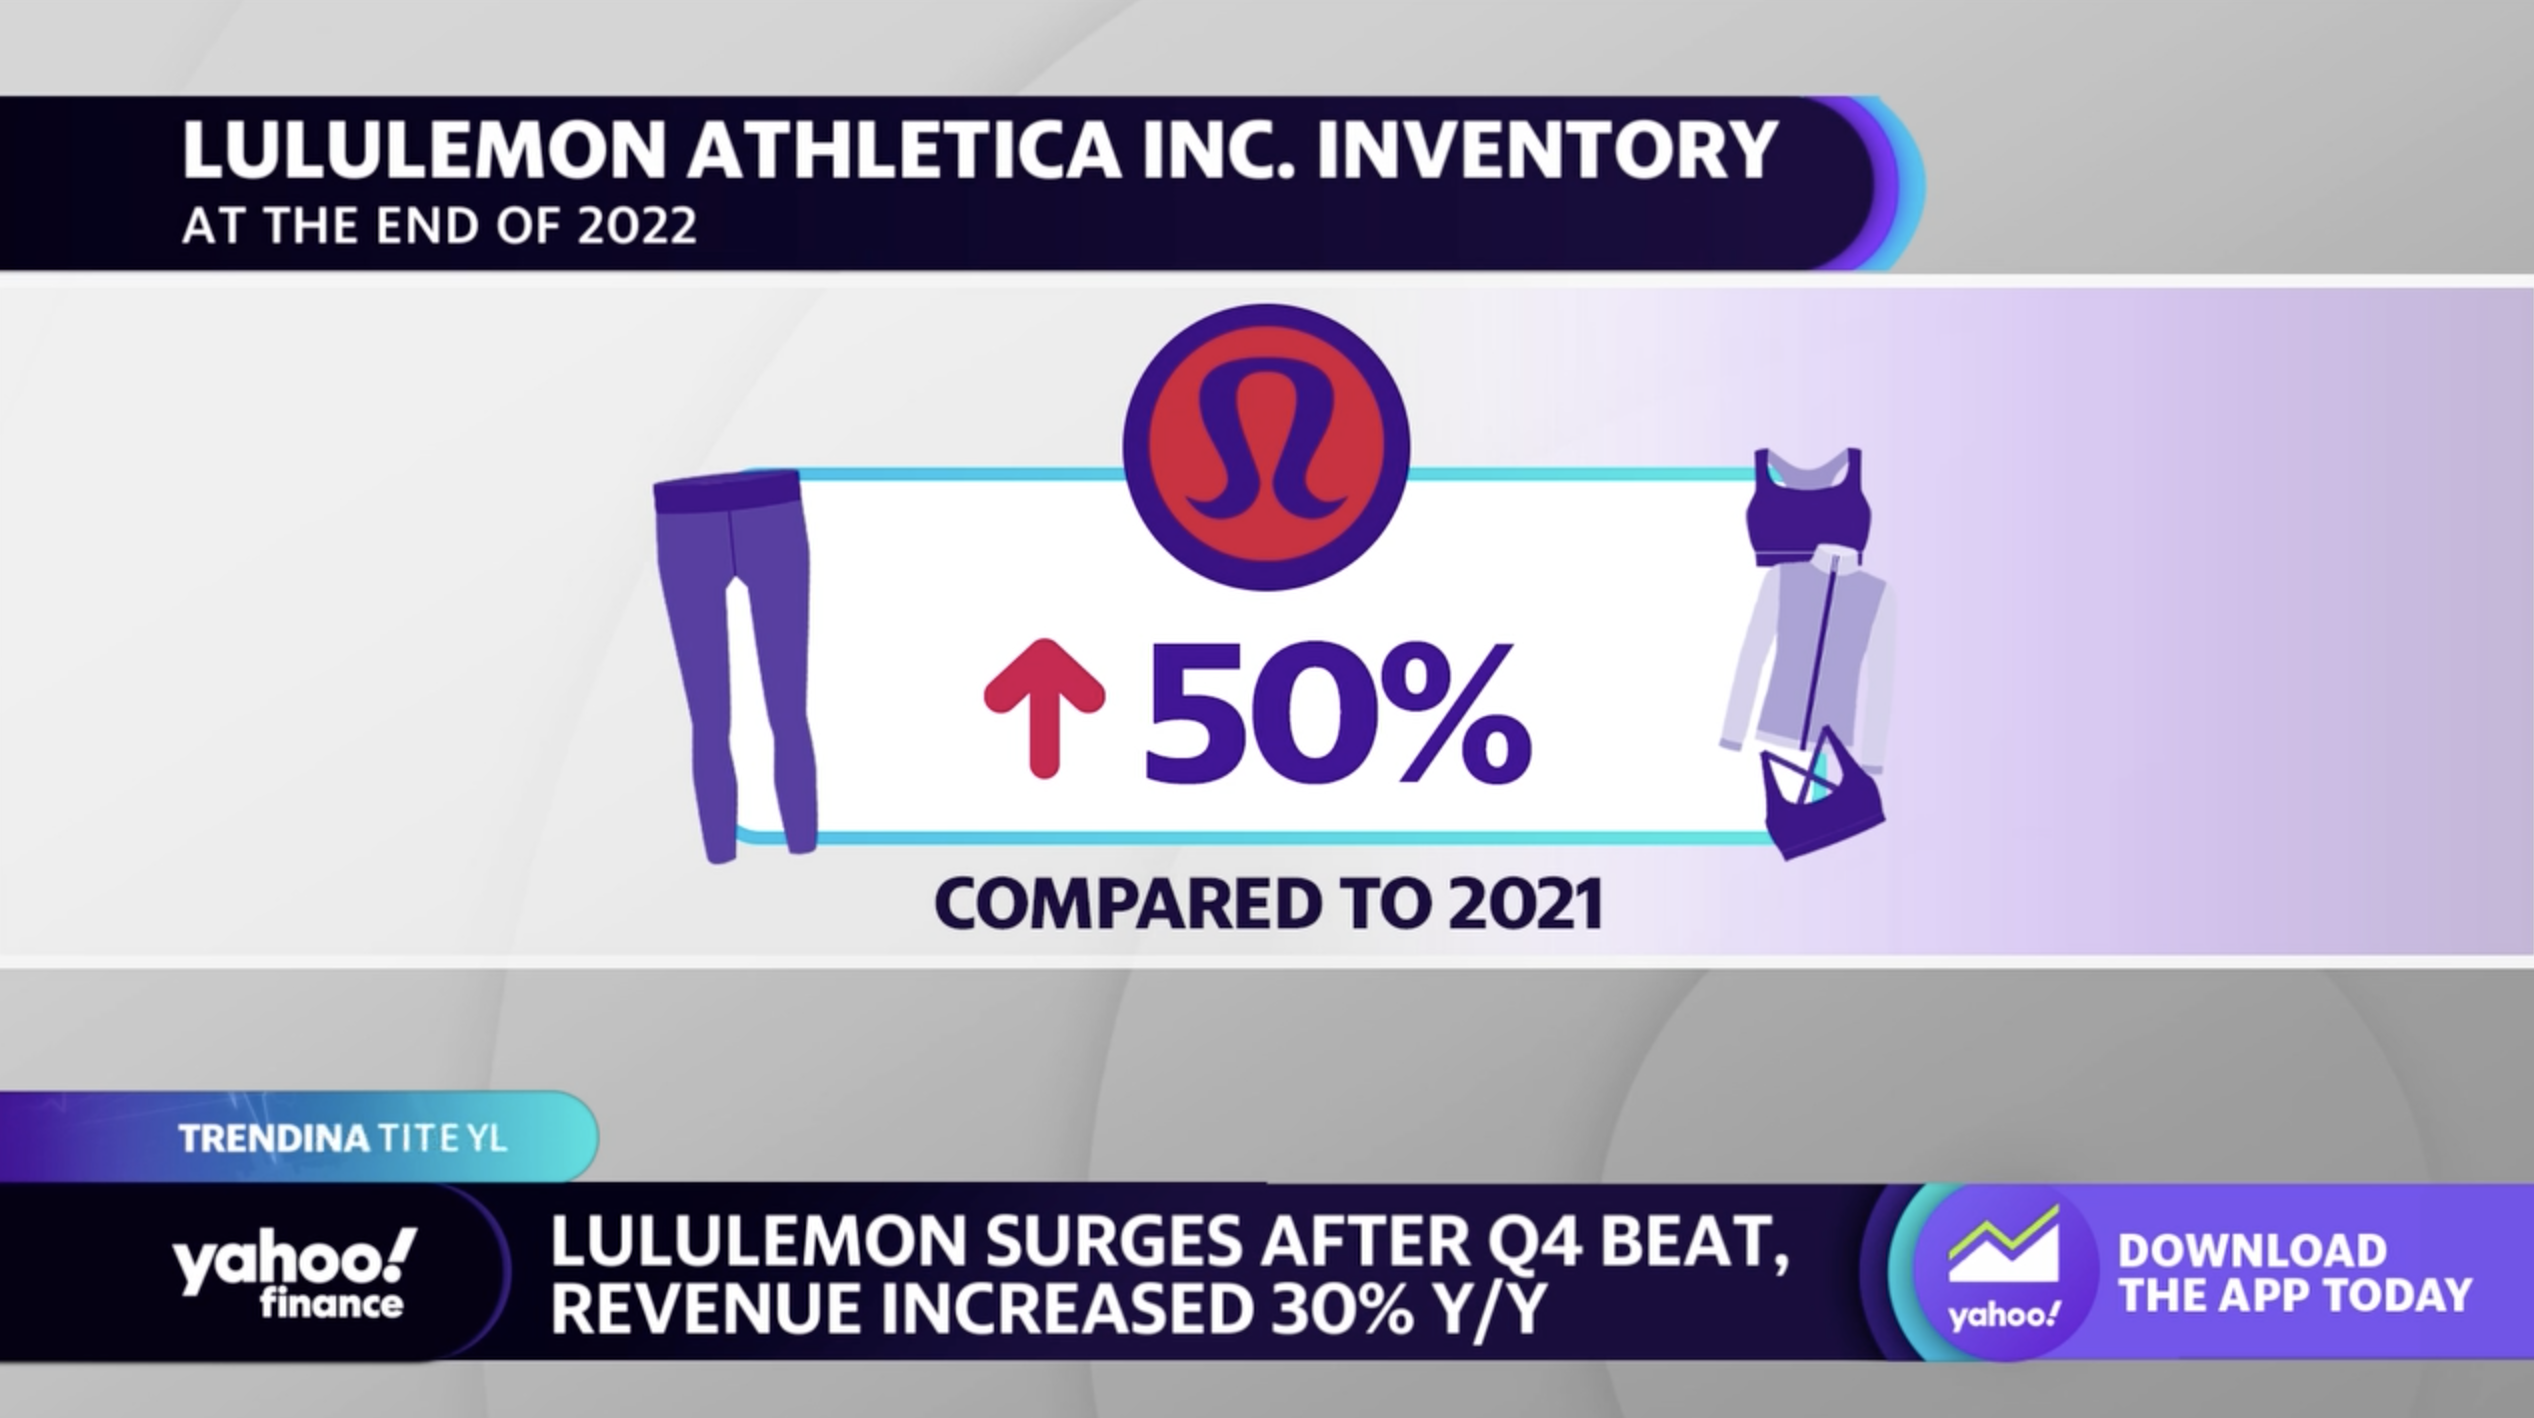 Lululemon gets mixed reception as sales stay strong (NASDAQ:LULU